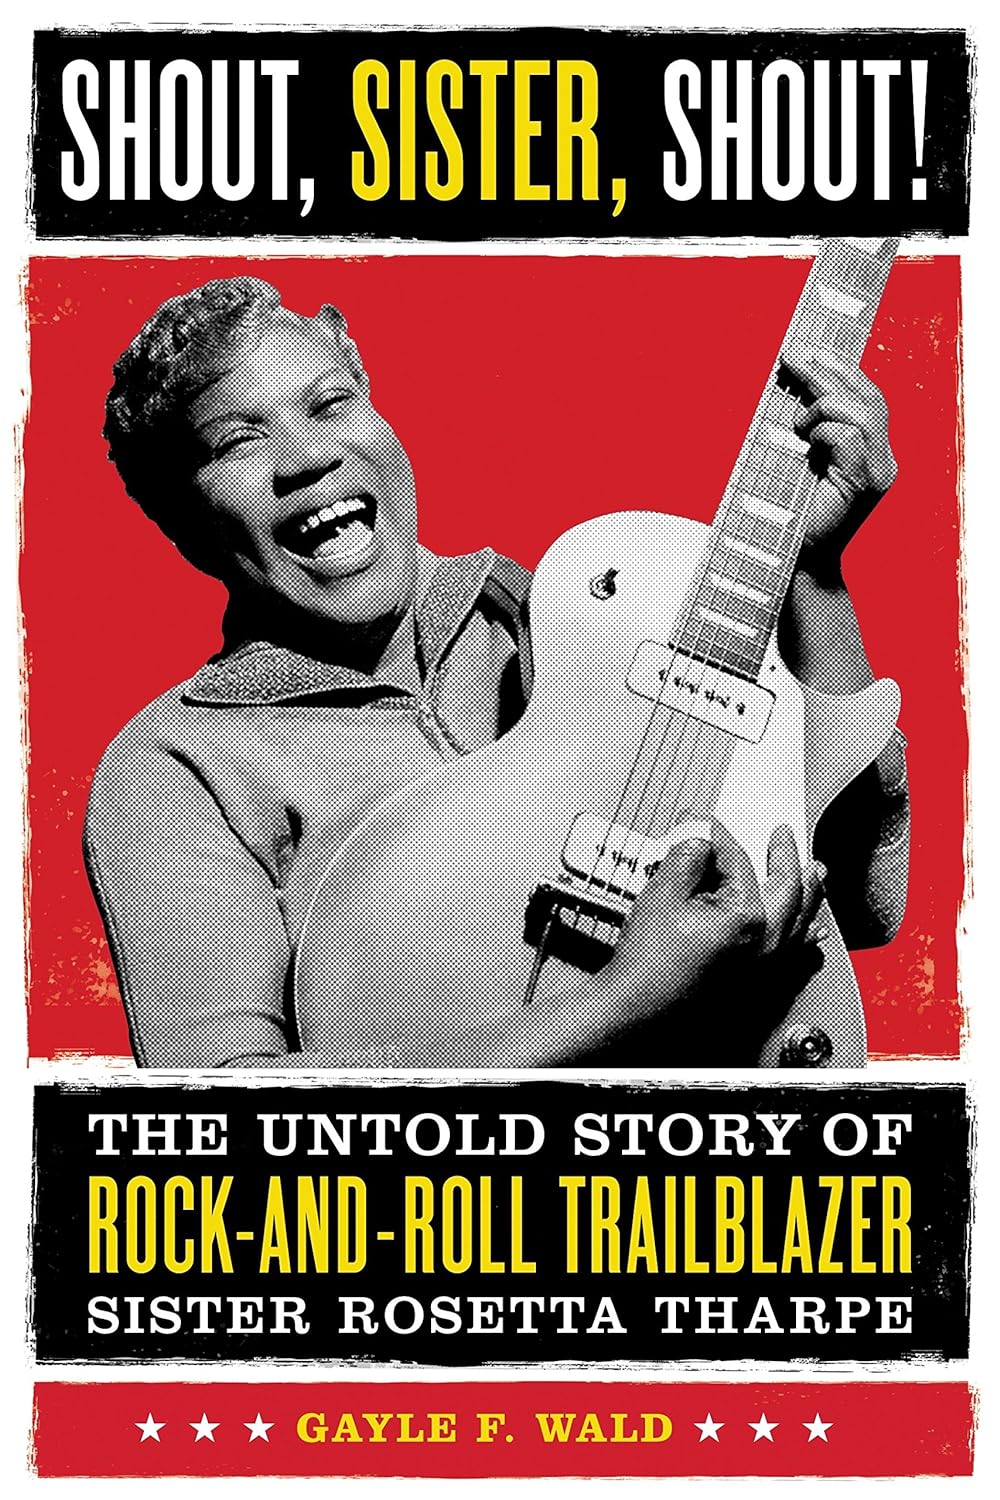 Shout, Sister, Shout!: The Untold Story of Rock-and-Roll Trailblazer Sister Rosetta Tharpe by Gayle Wald